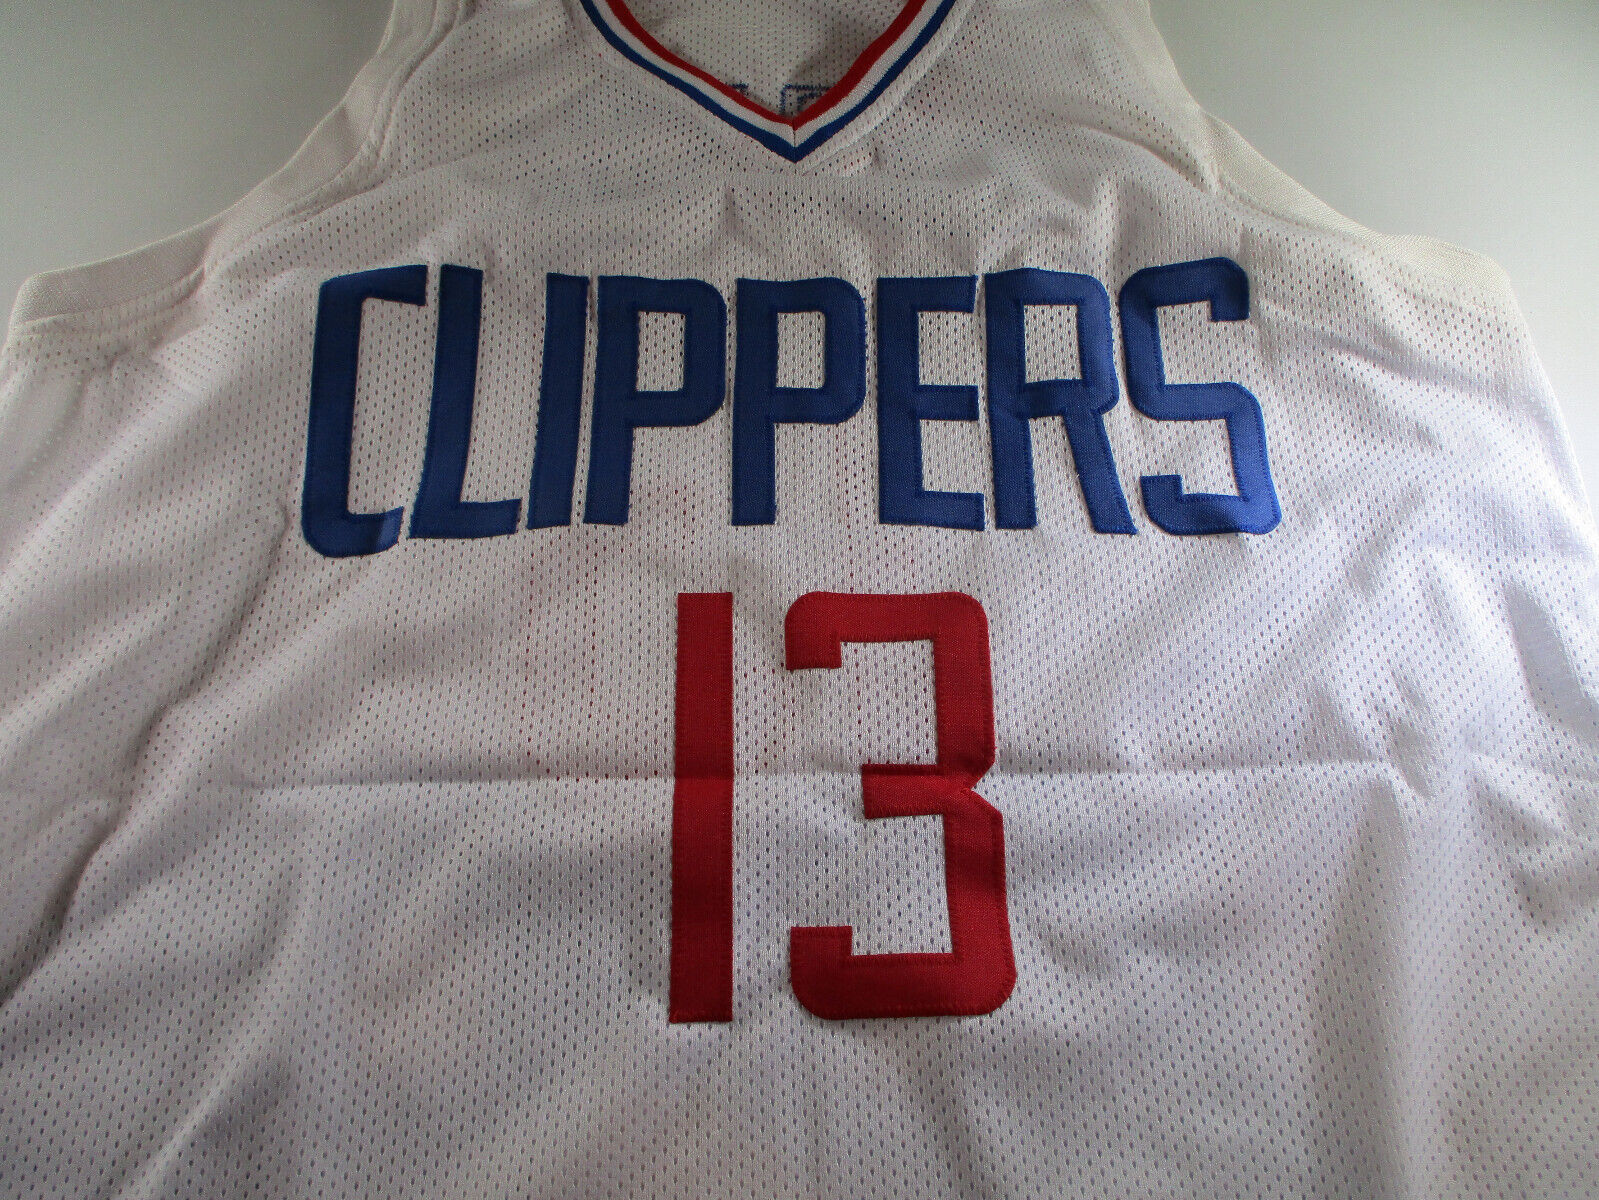 Paul Geoorge / Autographed Los Angeles Clippers Custom Basketball Jersey / COA